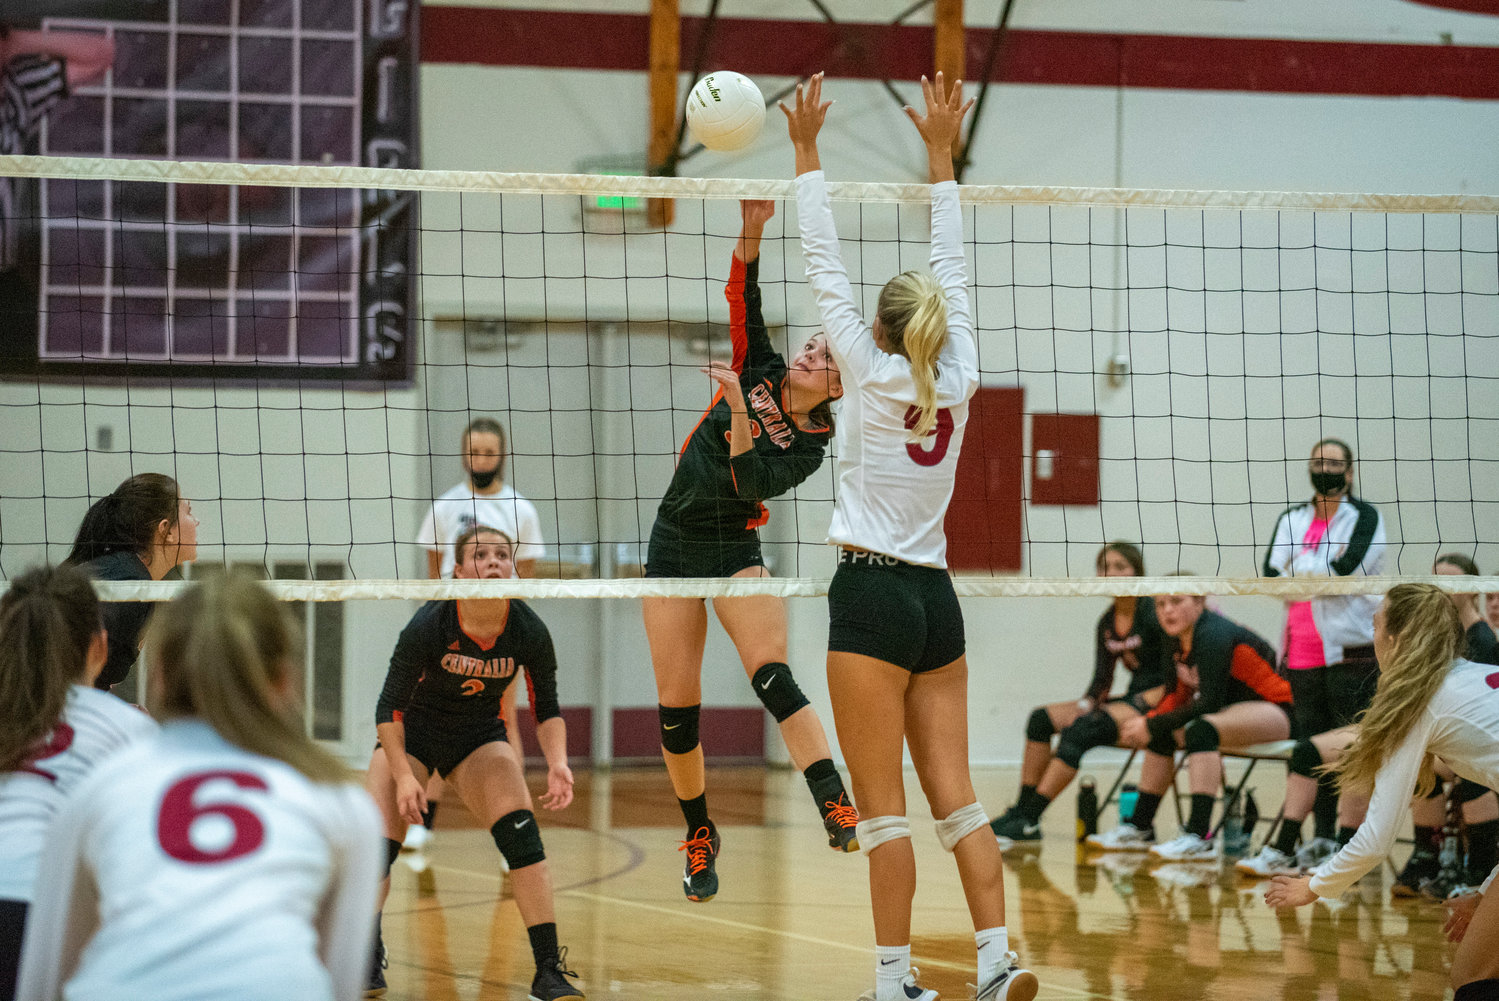 Centralia's Ella Orr (3) spikes the ball past W.F. West's Ava Olsen (9) during the first leg of the Swamp Cup on Tuesday in Chehalis.